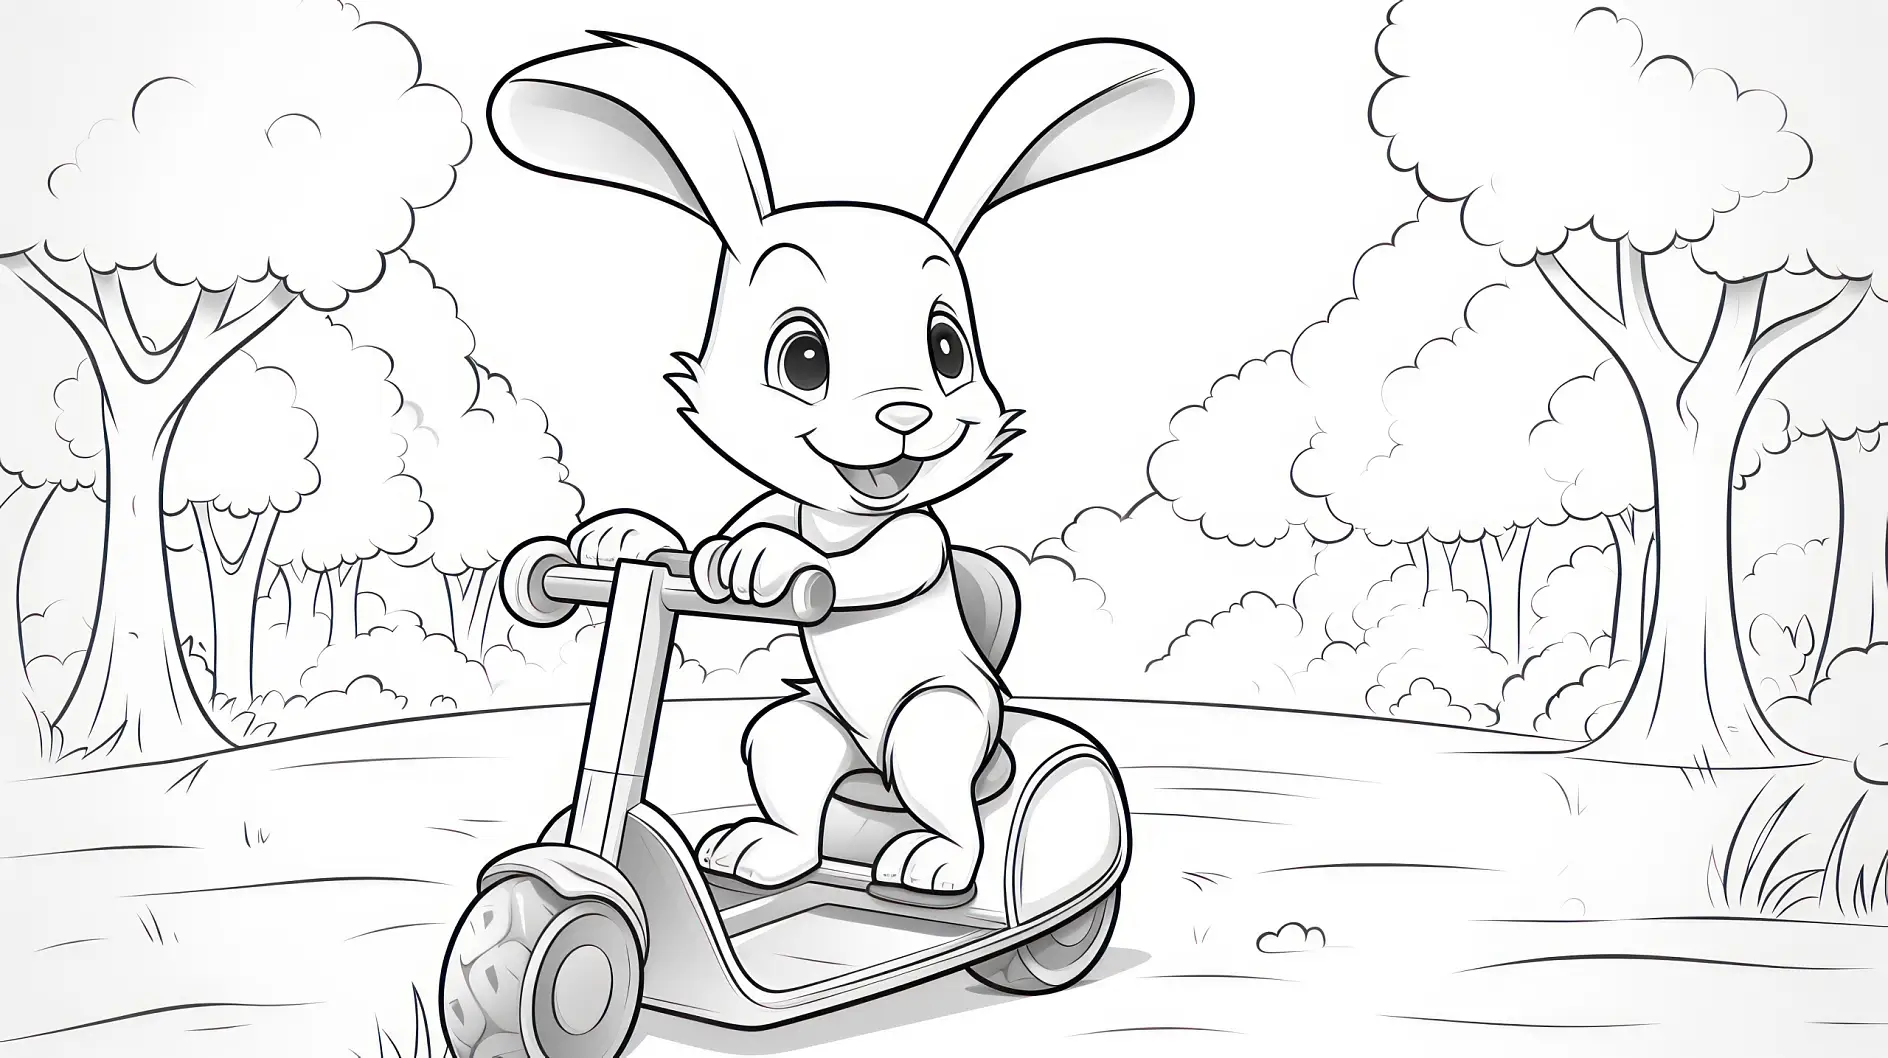 Ausmalbild fröhlicher Hase fährt TretrollerHappy rabbit riding a scooter in coloring book page for kids